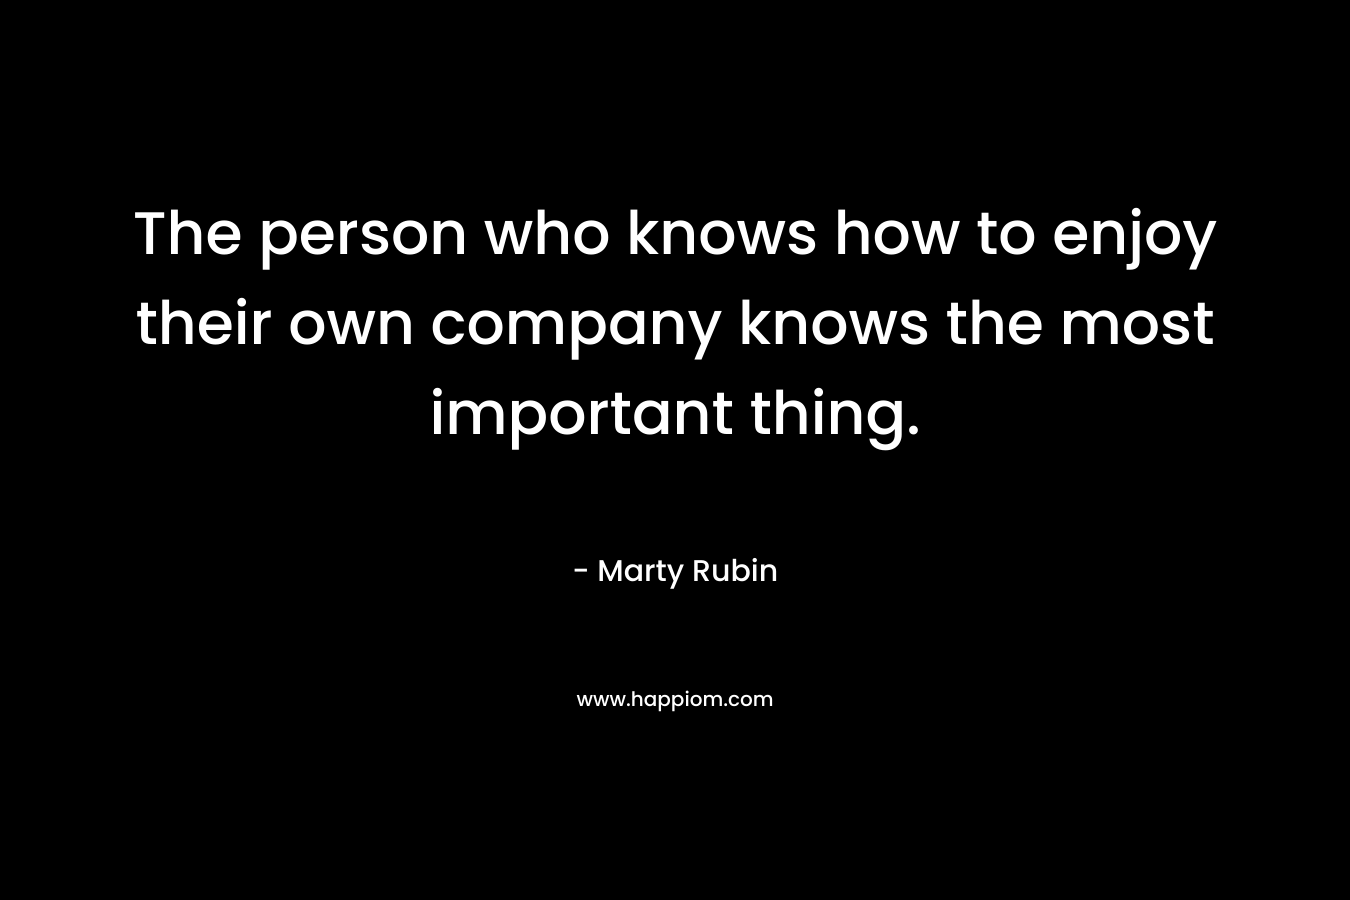 The person who knows how to enjoy their own company knows the most important thing.